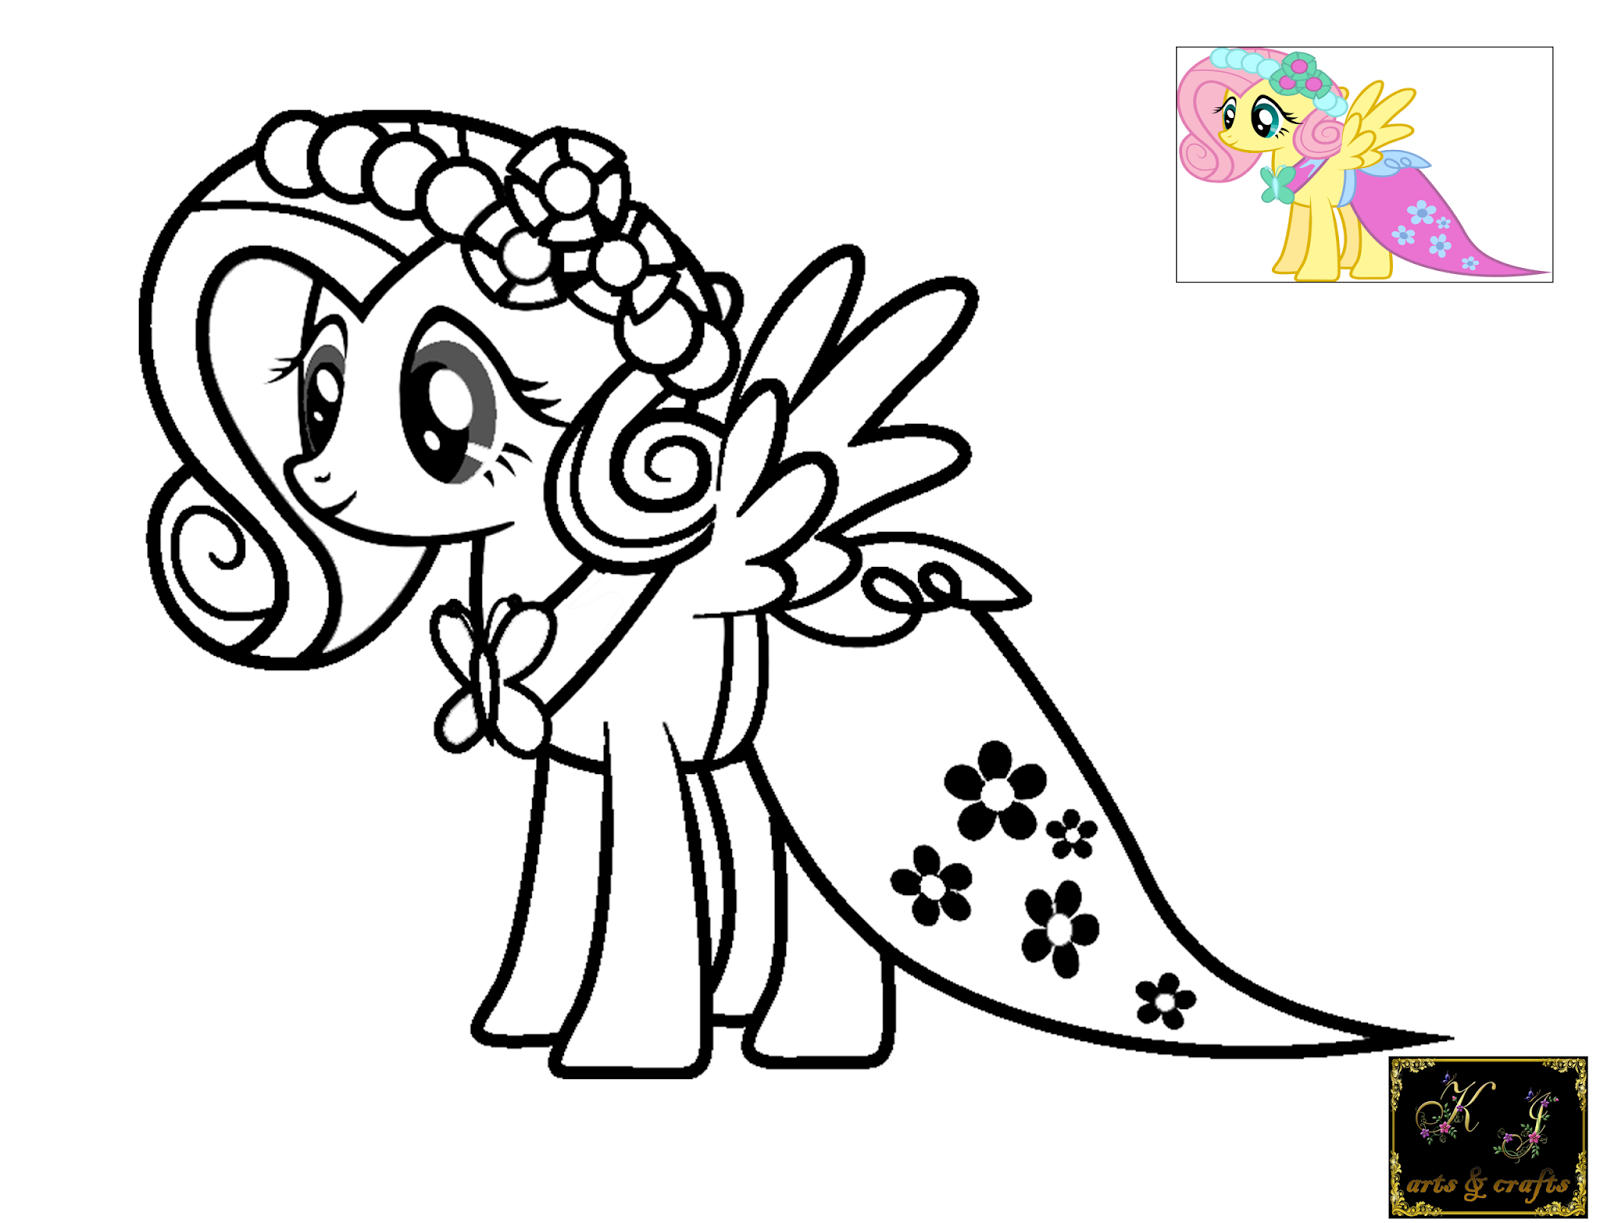 fluttershy coloring pages - My Little Pony Fluttershy Coloring Pages Memutihkan Kulit 